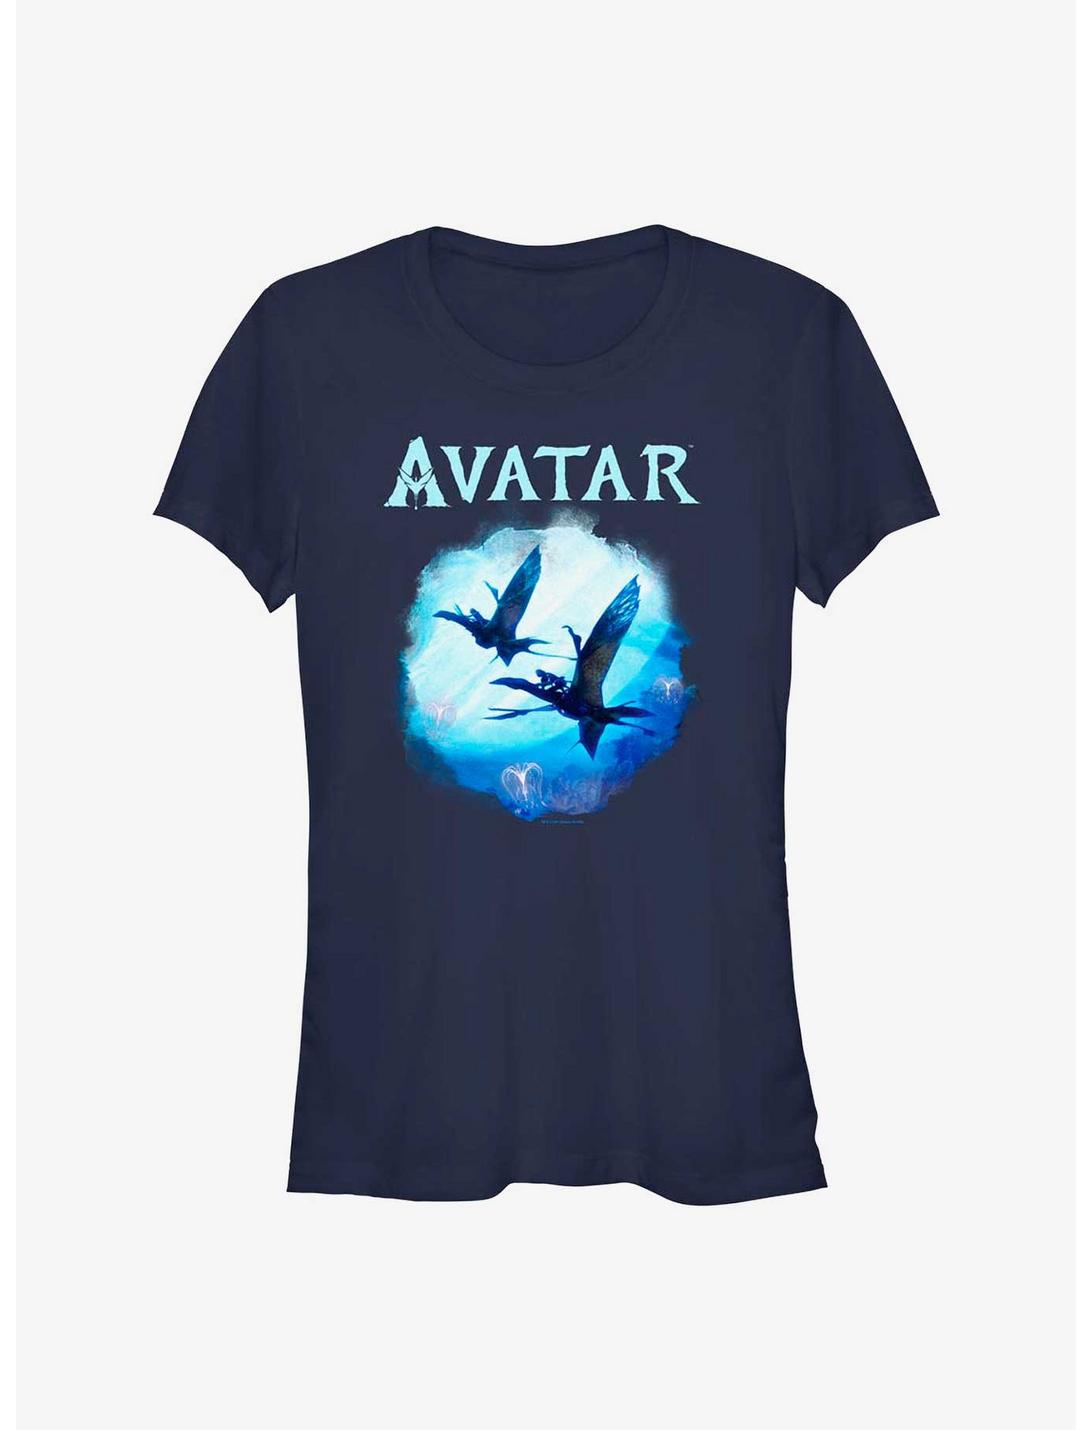 Avatar: The Way of Water Look To The Sky Girls T-Shirt, NAVY, hi-res